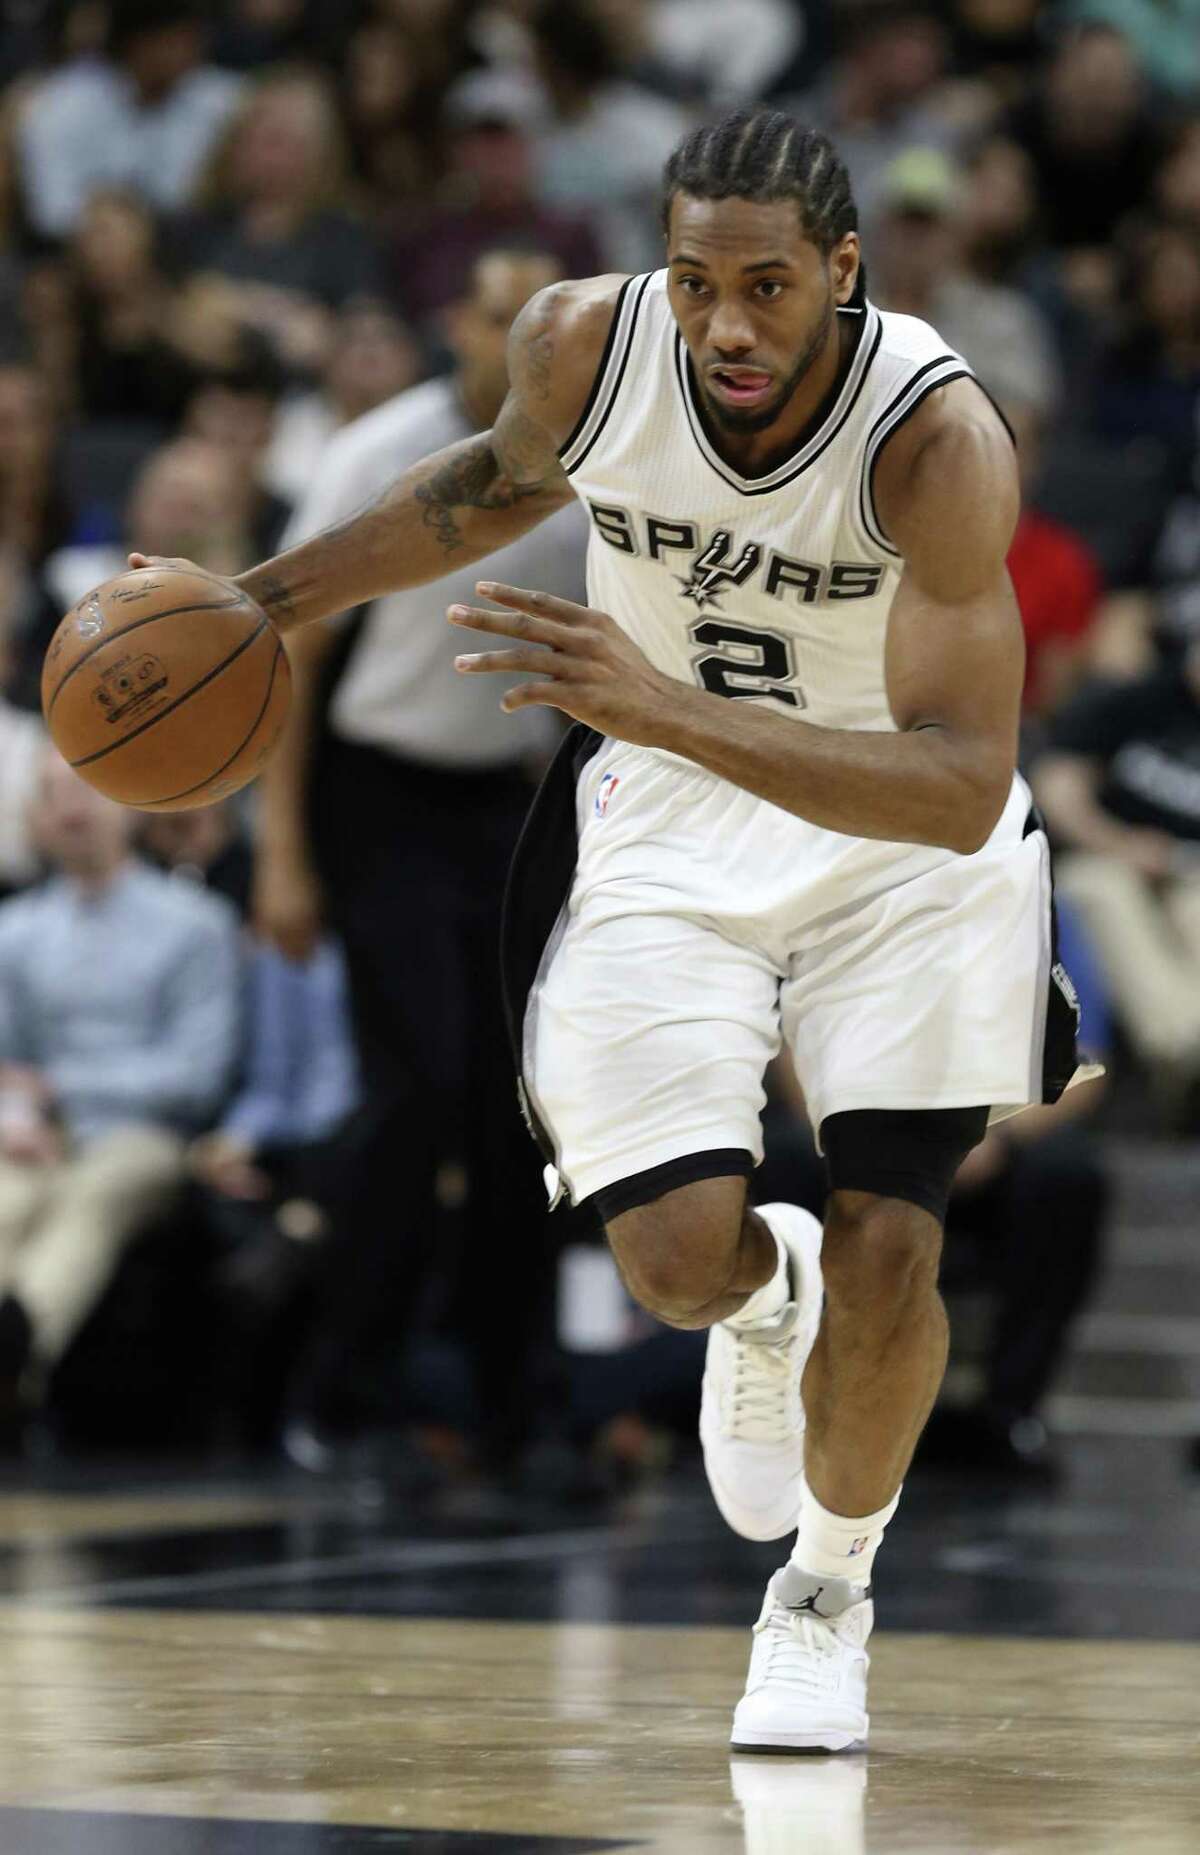 After a steal, San Antonio Spurs' Kawhi Leonard drives the ball during the first half against the New Orleans Pelicans at the AT&T Center, Wednesday, March 30, 2016.